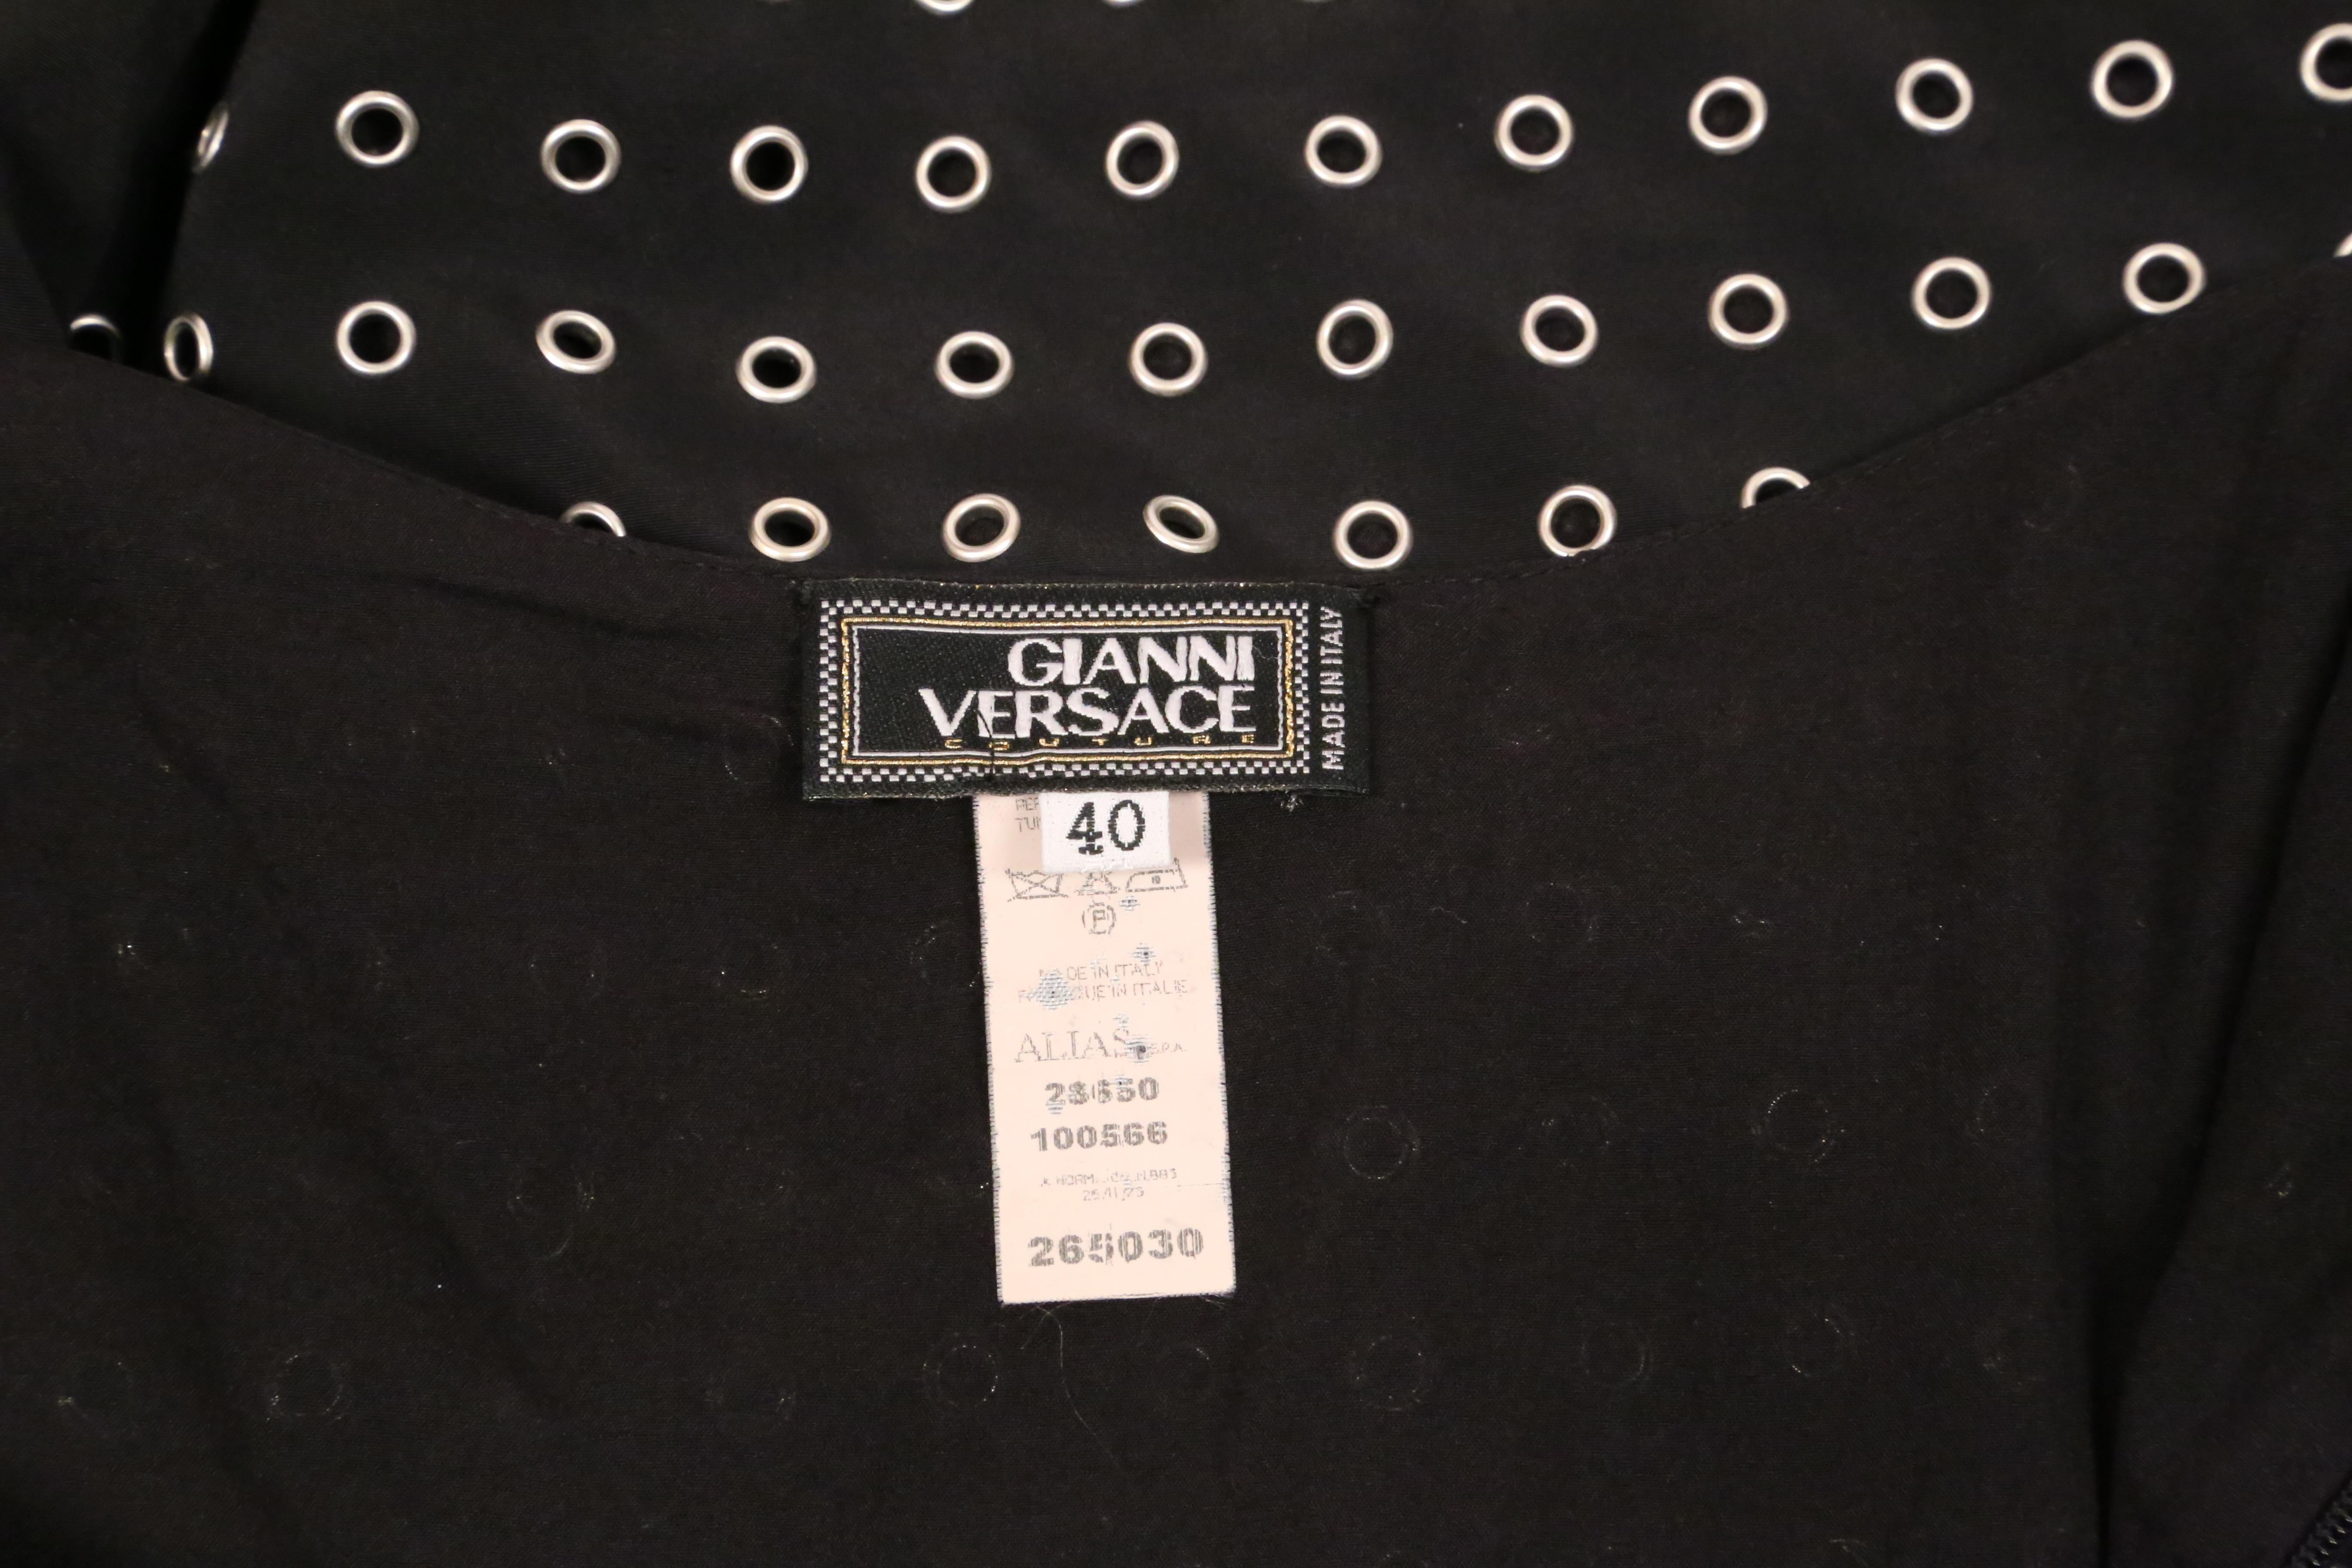 1990's GIANNI VERSACE COUTURE black jersey dress with grommets and cut out back For Sale 3